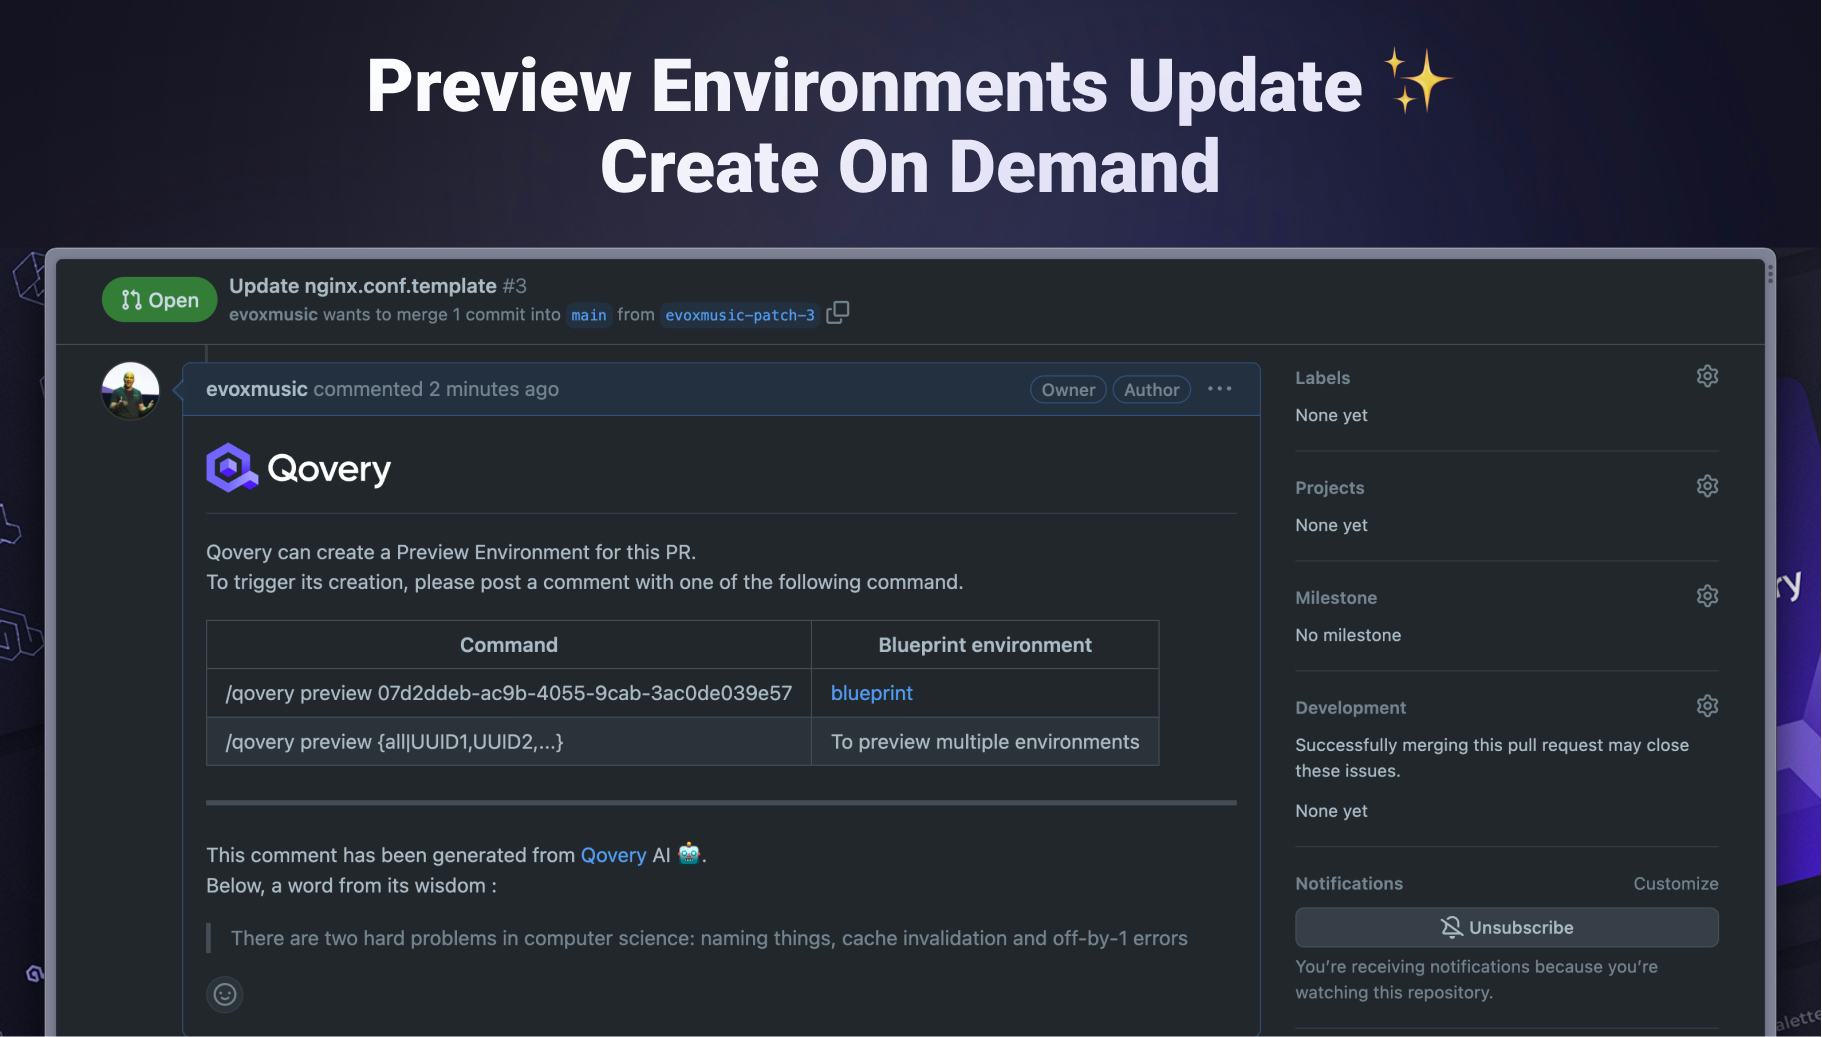 Manually Trigger Preview Environments with Create On Demand Feature